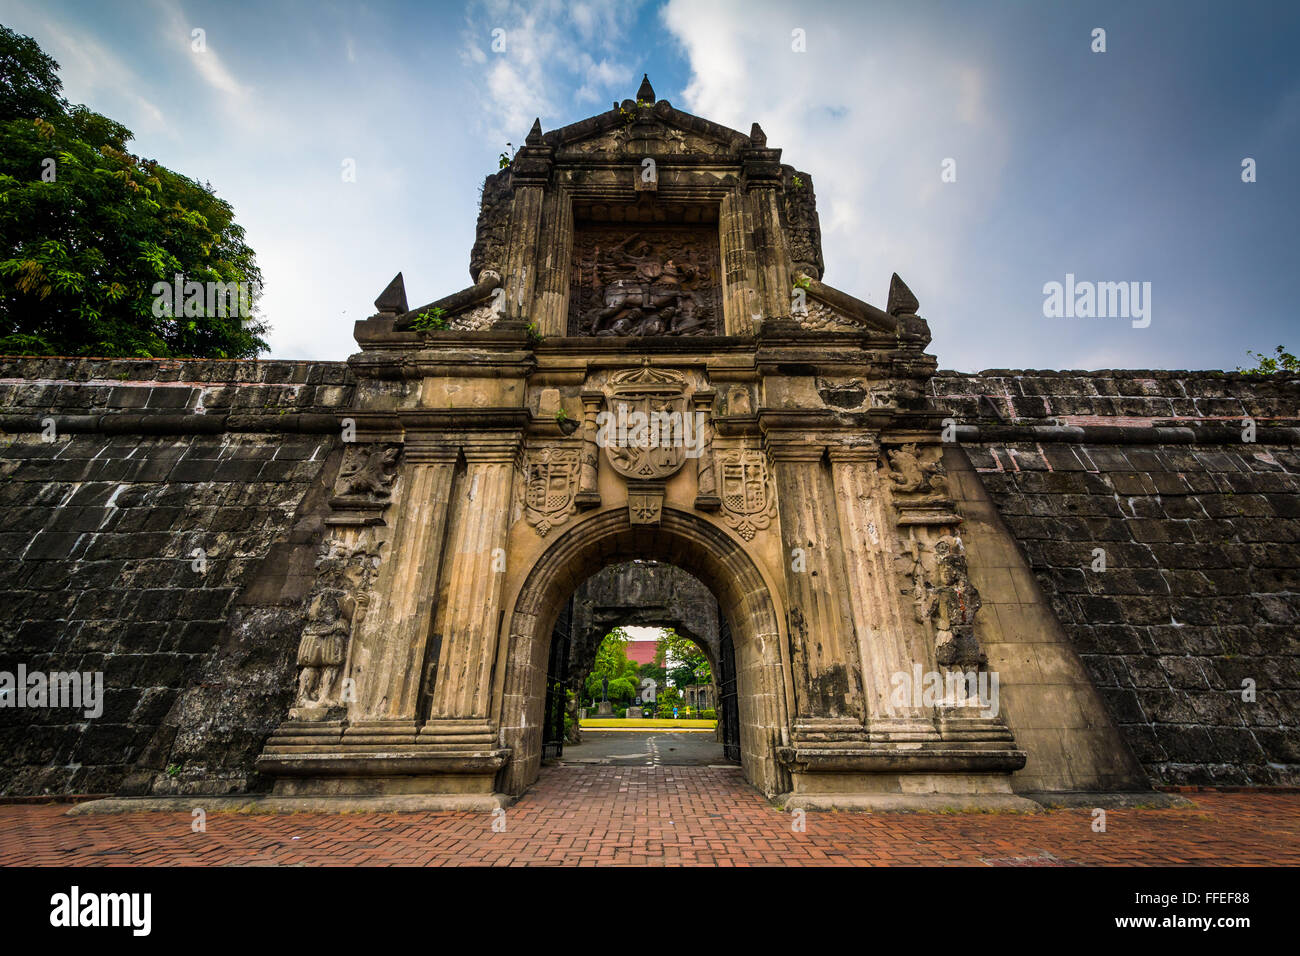 Entrance to Fort Santiago, in Intramuros, Manila, The Philippines. Stock Photo